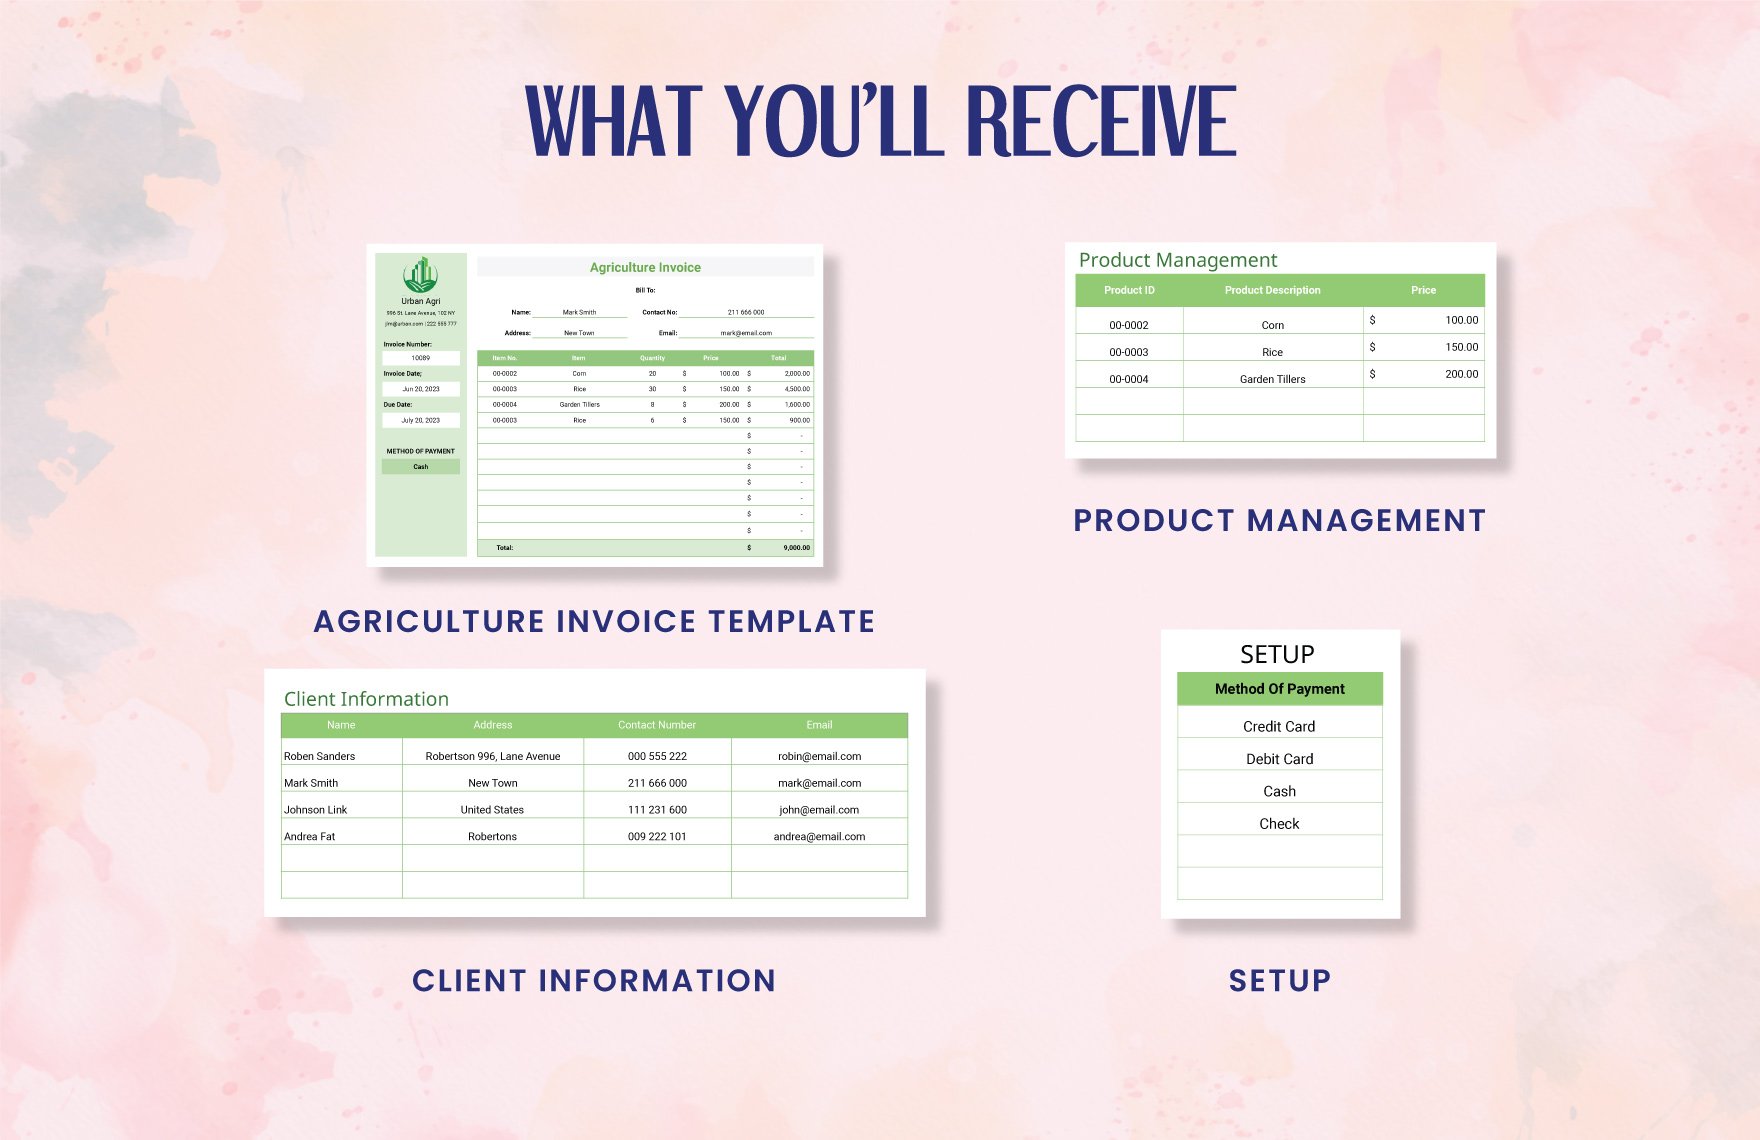 Agriculture Invoice Template